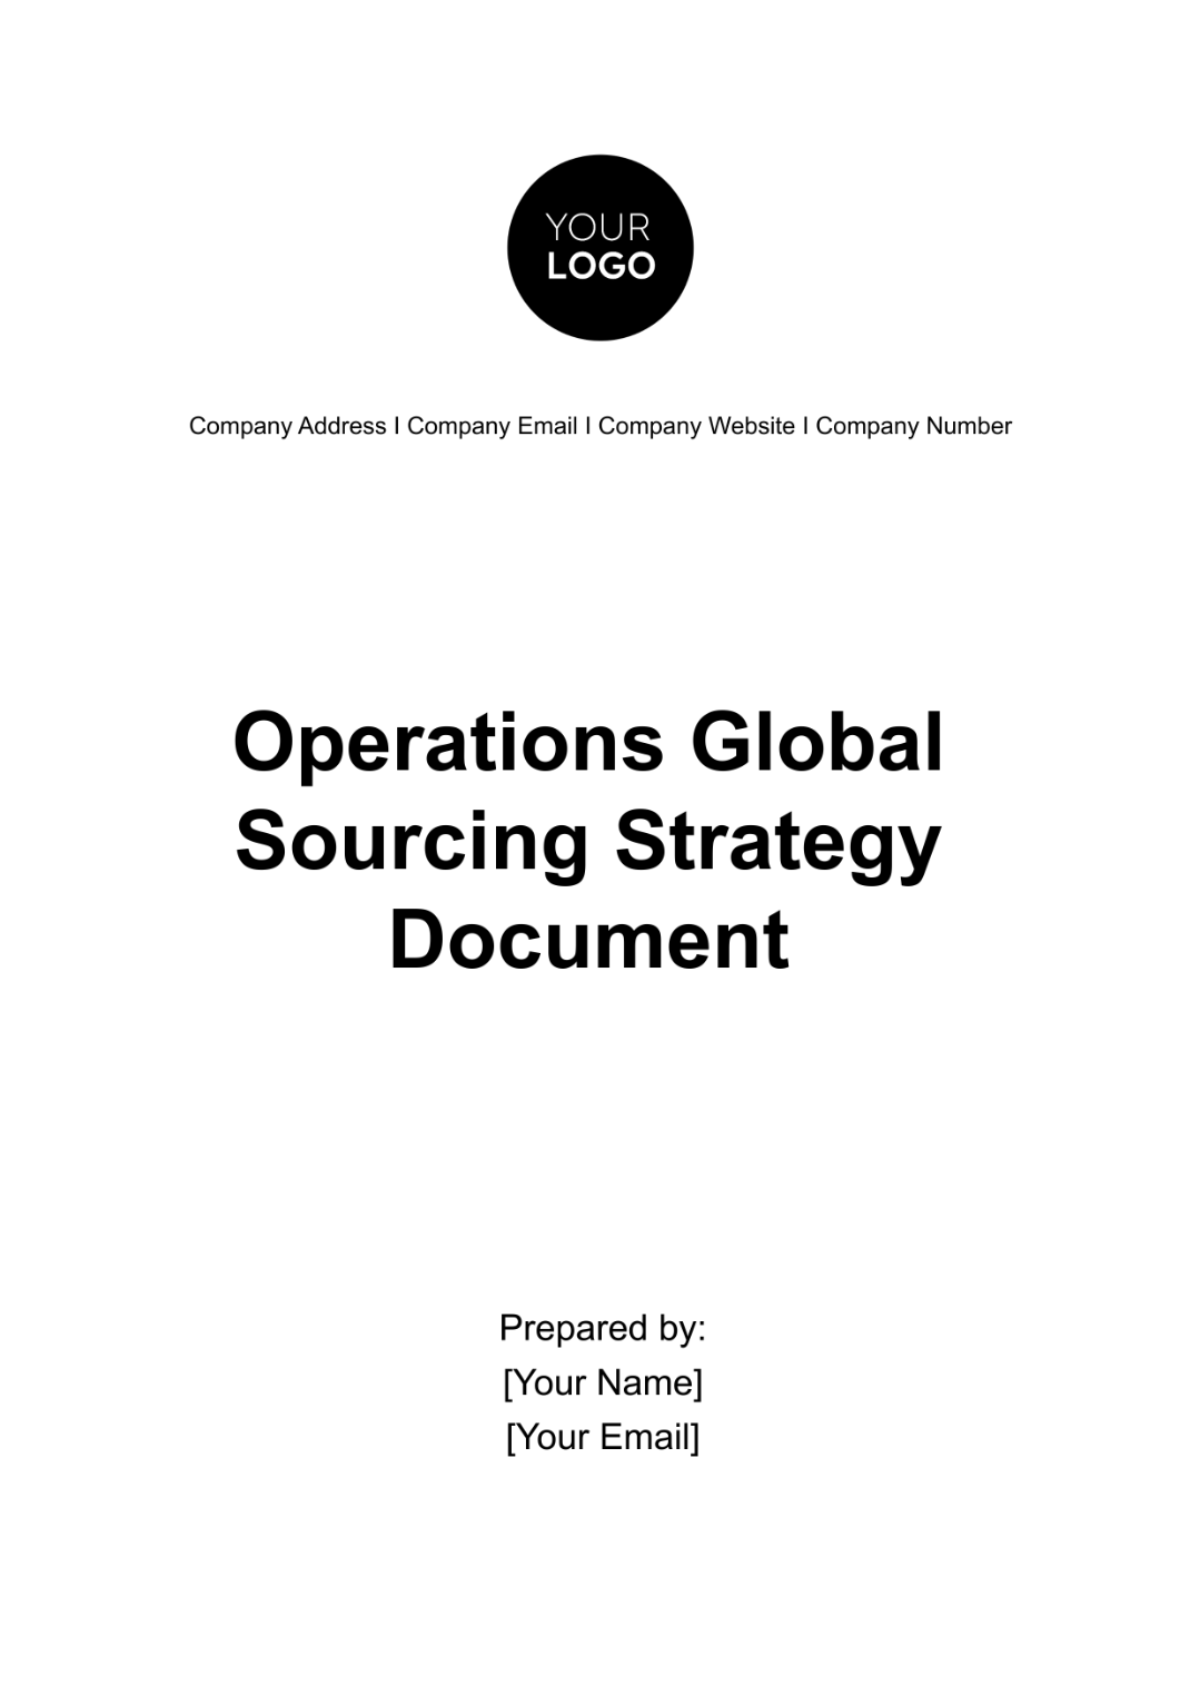 Operations Global Sourcing Strategy Document Template